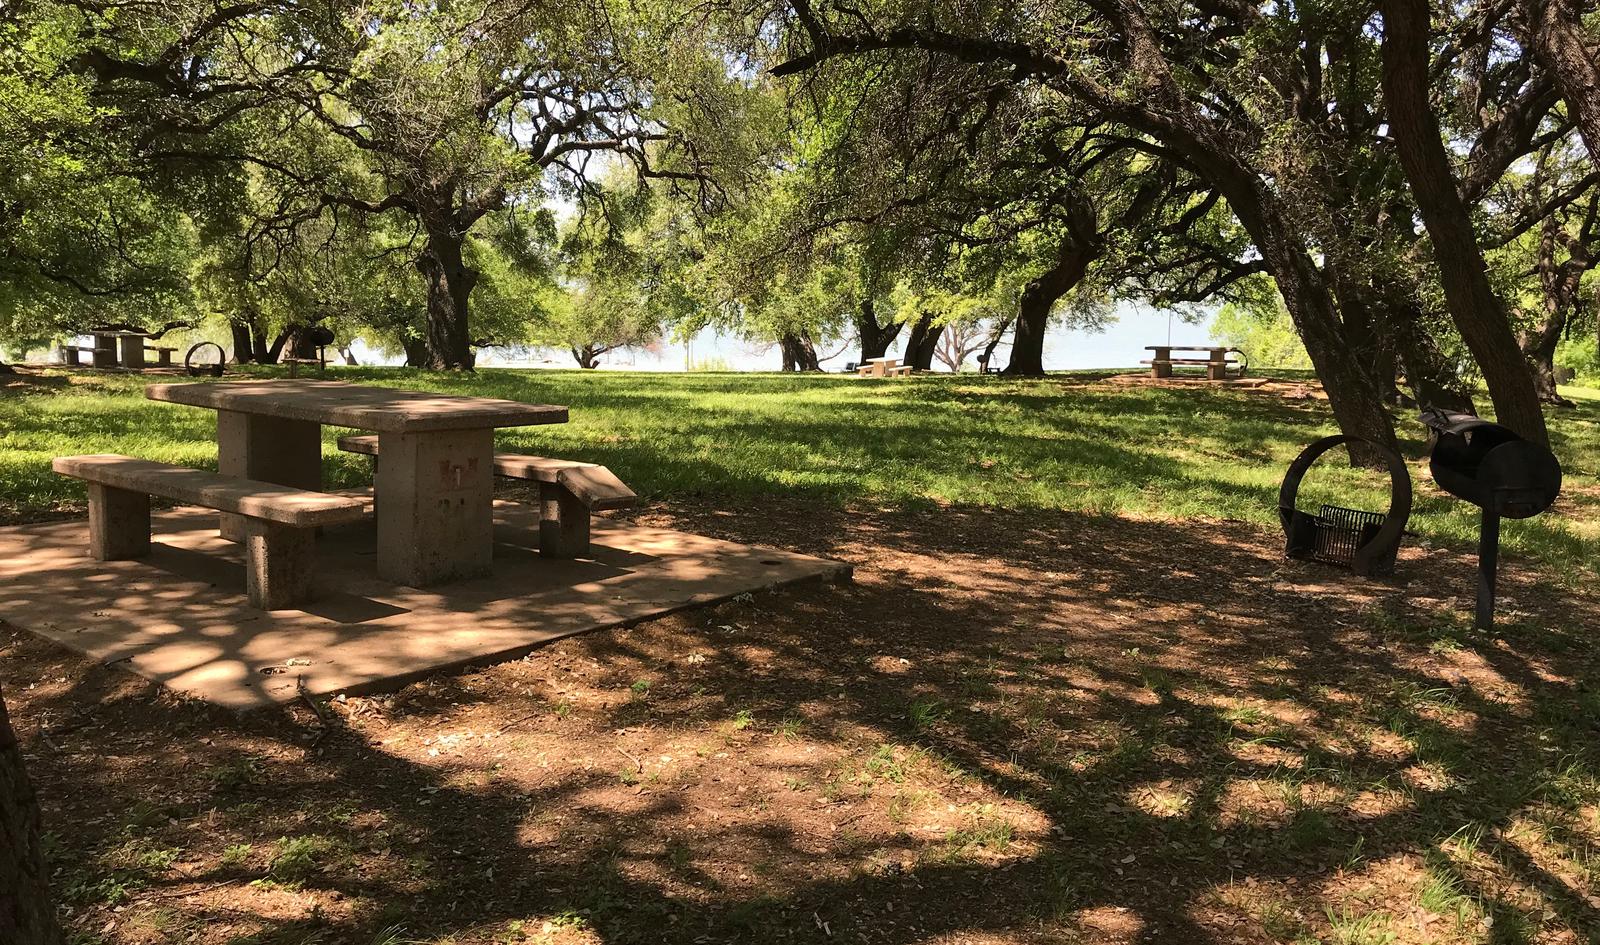 Tent site with picnic table, grill, and fire ring with Waco Lake in the background